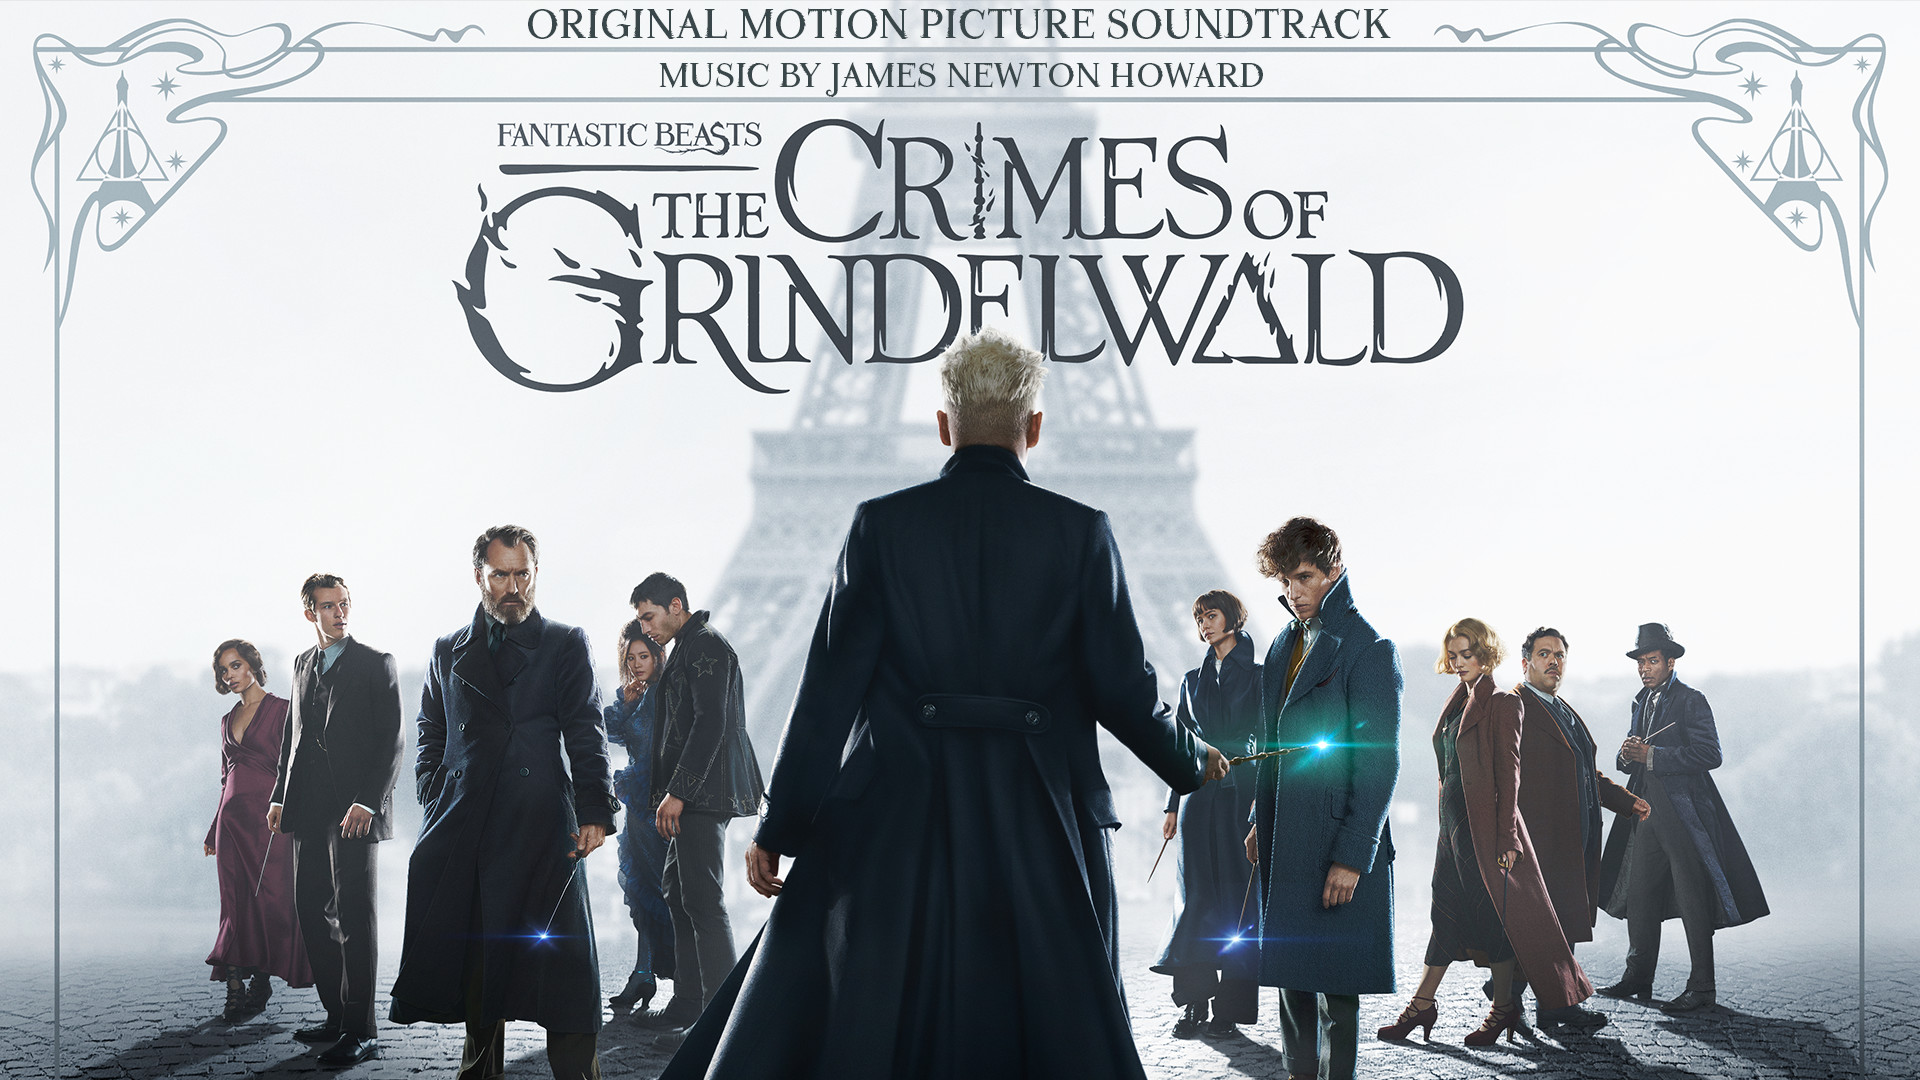 Fantastic Beasts The Crimes Of Grindelwald Soundtrack Details Announced Wizarding World